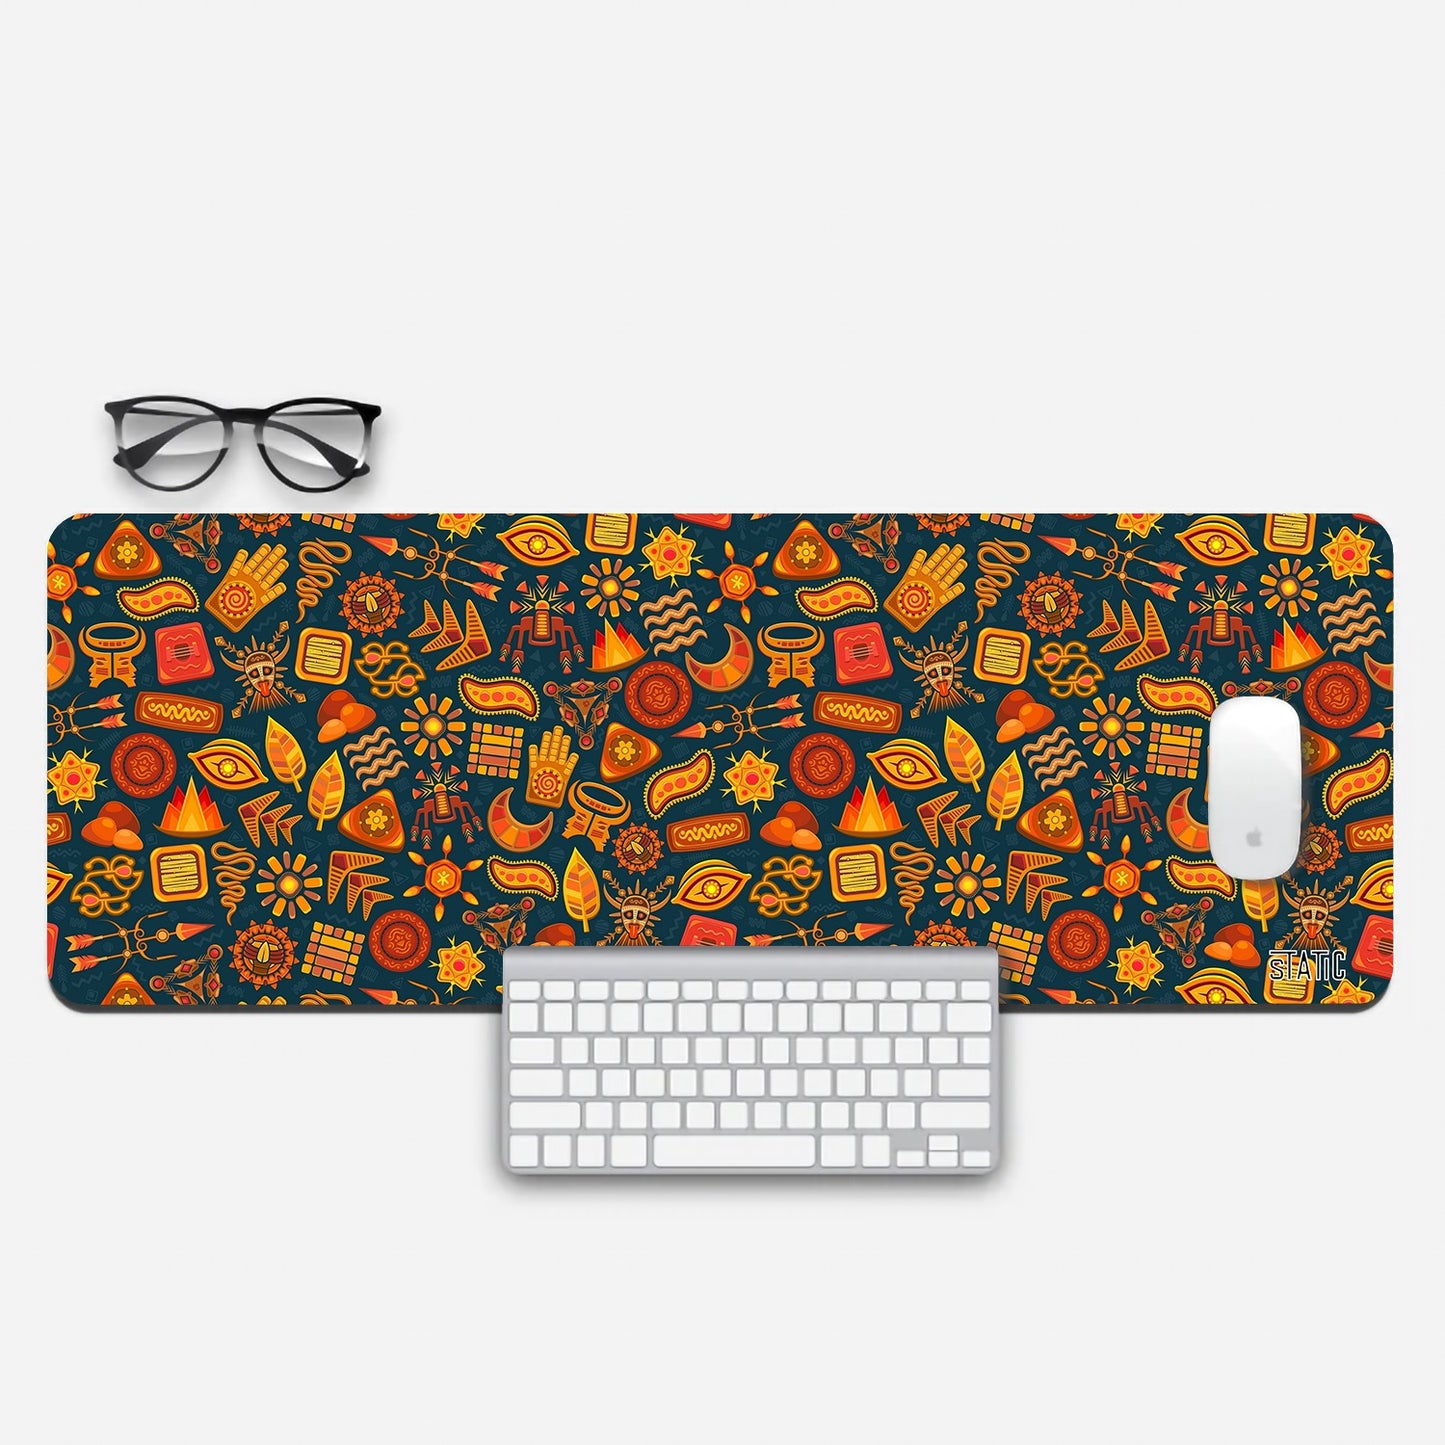 Elevate your gaming station with our Extended Gaming Mouse Pad, adorned with a mesmerizing collage of random red and golden doodles. Shapes, masks, leaves, and flowers come together in a unique and artistic design. Not only does it add flair to your setup, but it also provides a skid-proof surface for precision gaming. Bring both style and functionality to your gaming experience with this exceptional accessory. Play in style and let your creativity flourish.